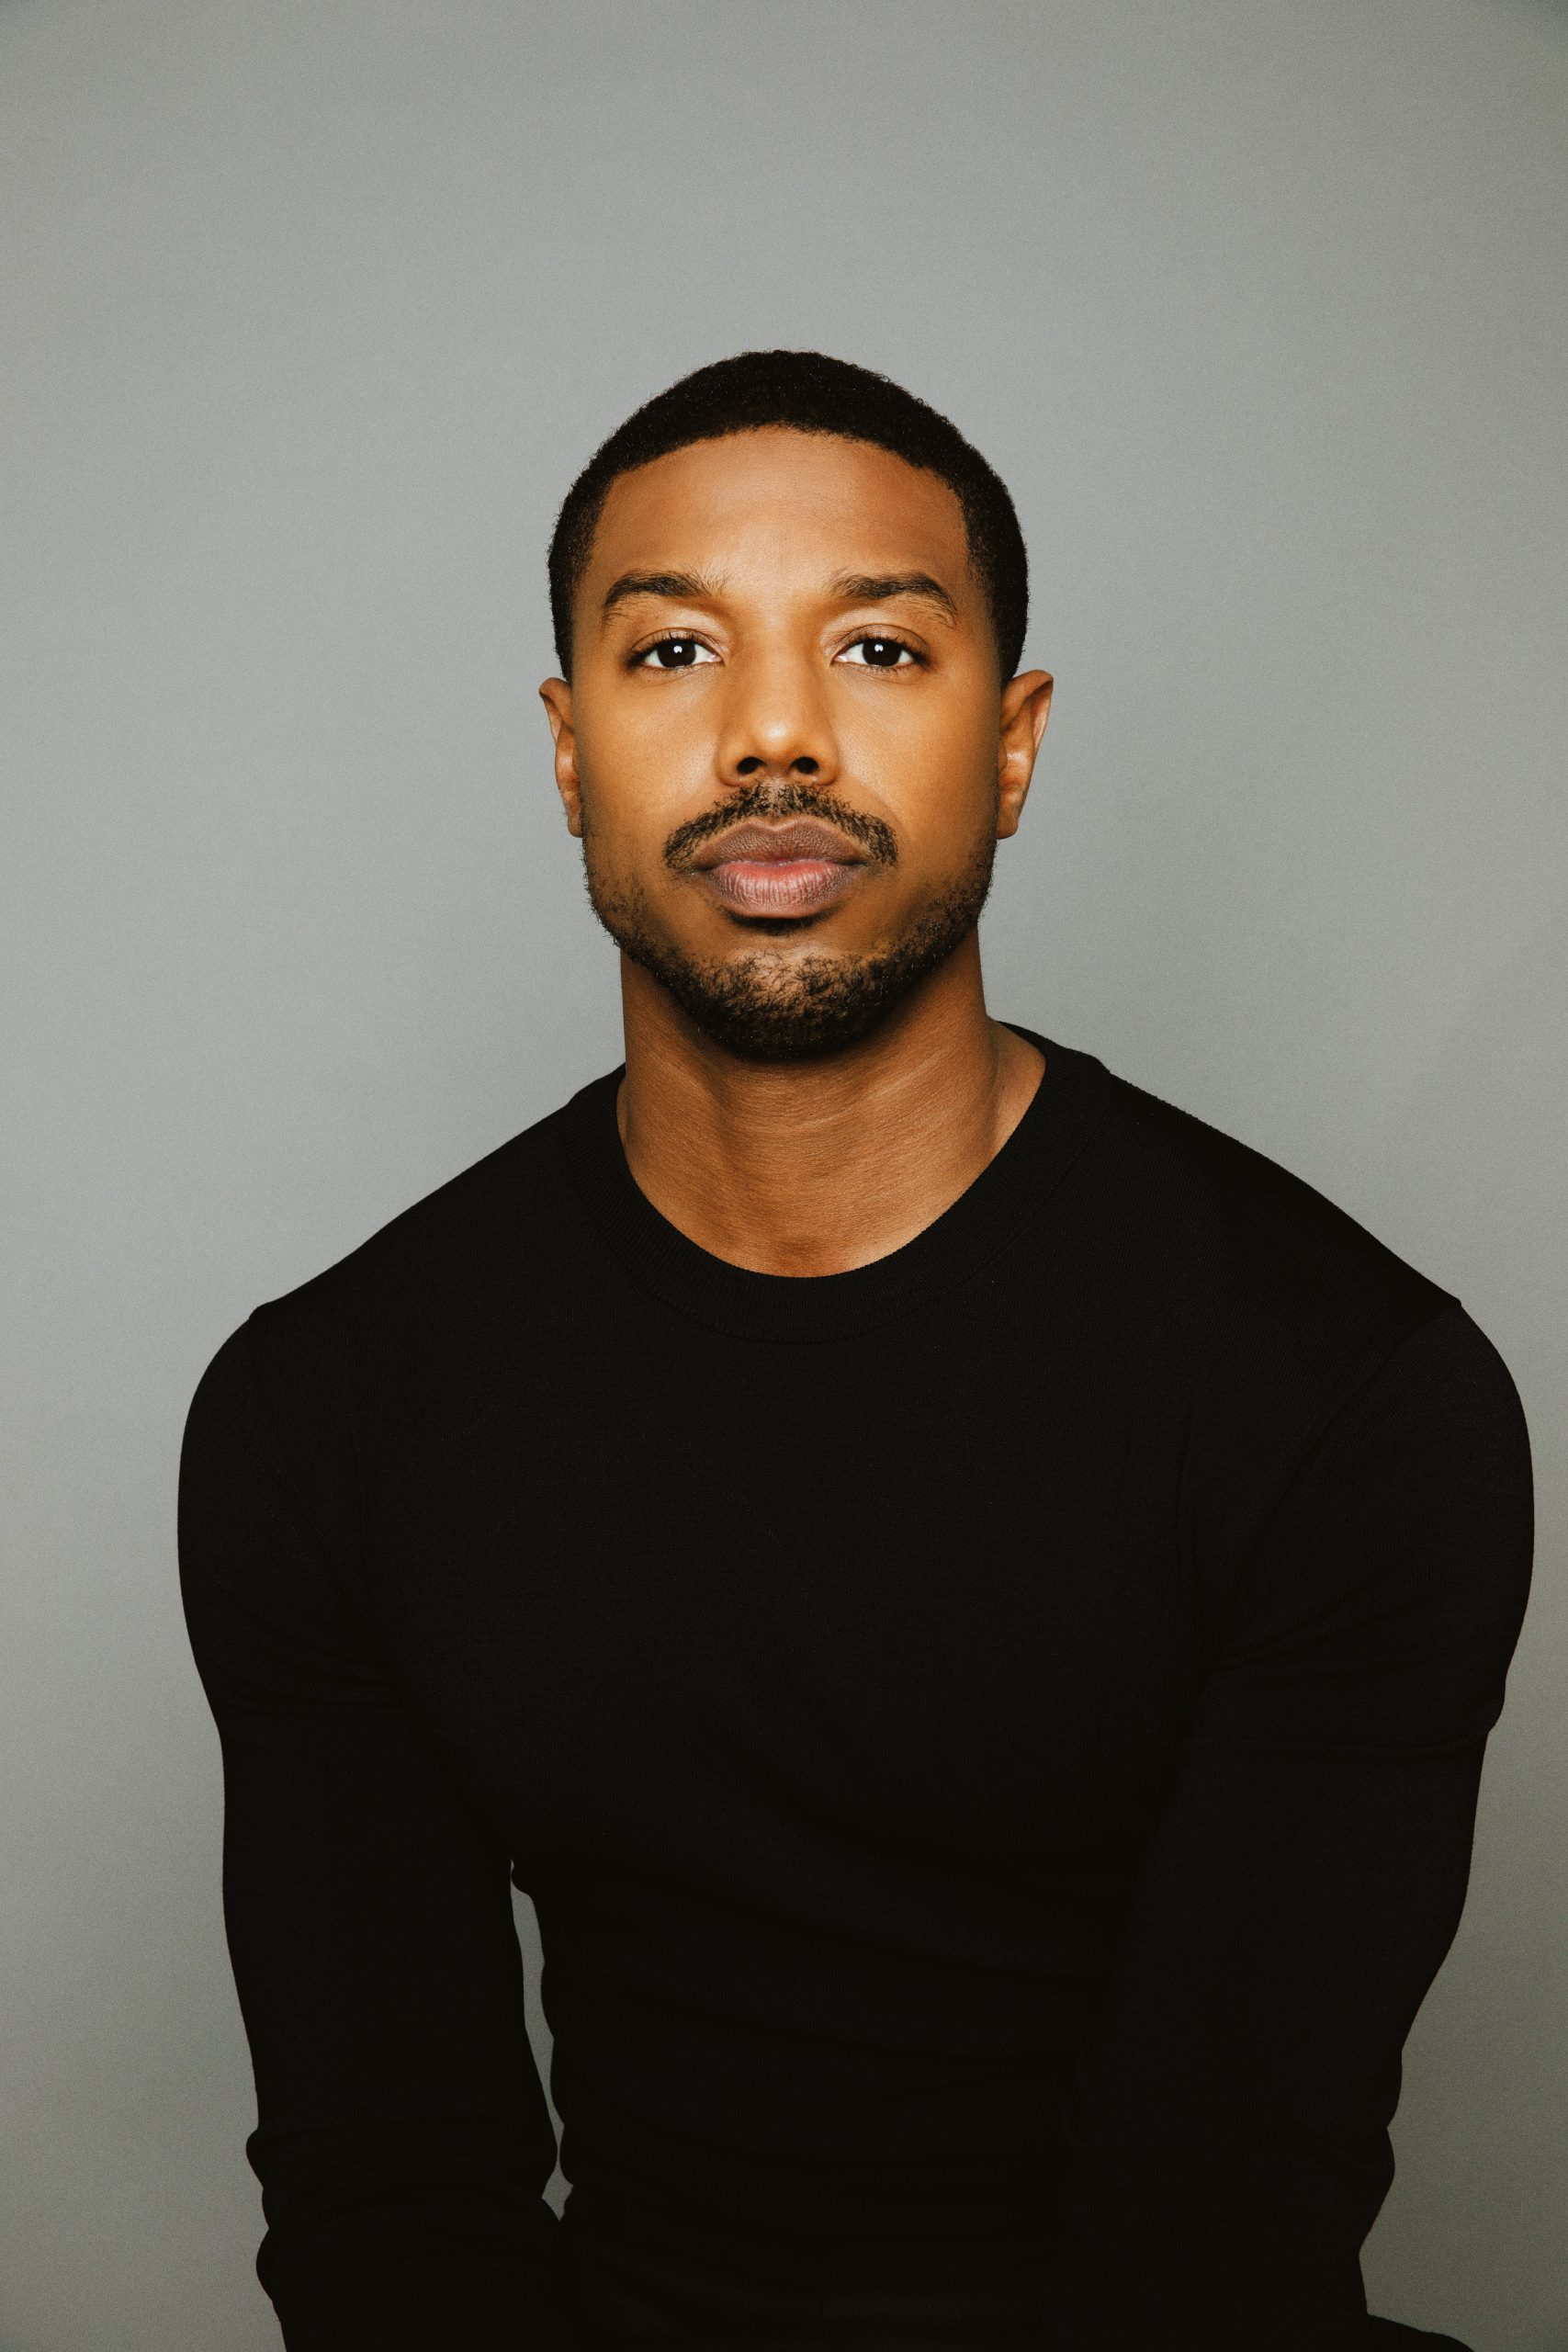 ACTOR/DIRECTOR/PRODUCER MICHAEL B. JORDAN TO BE HONORED WITH